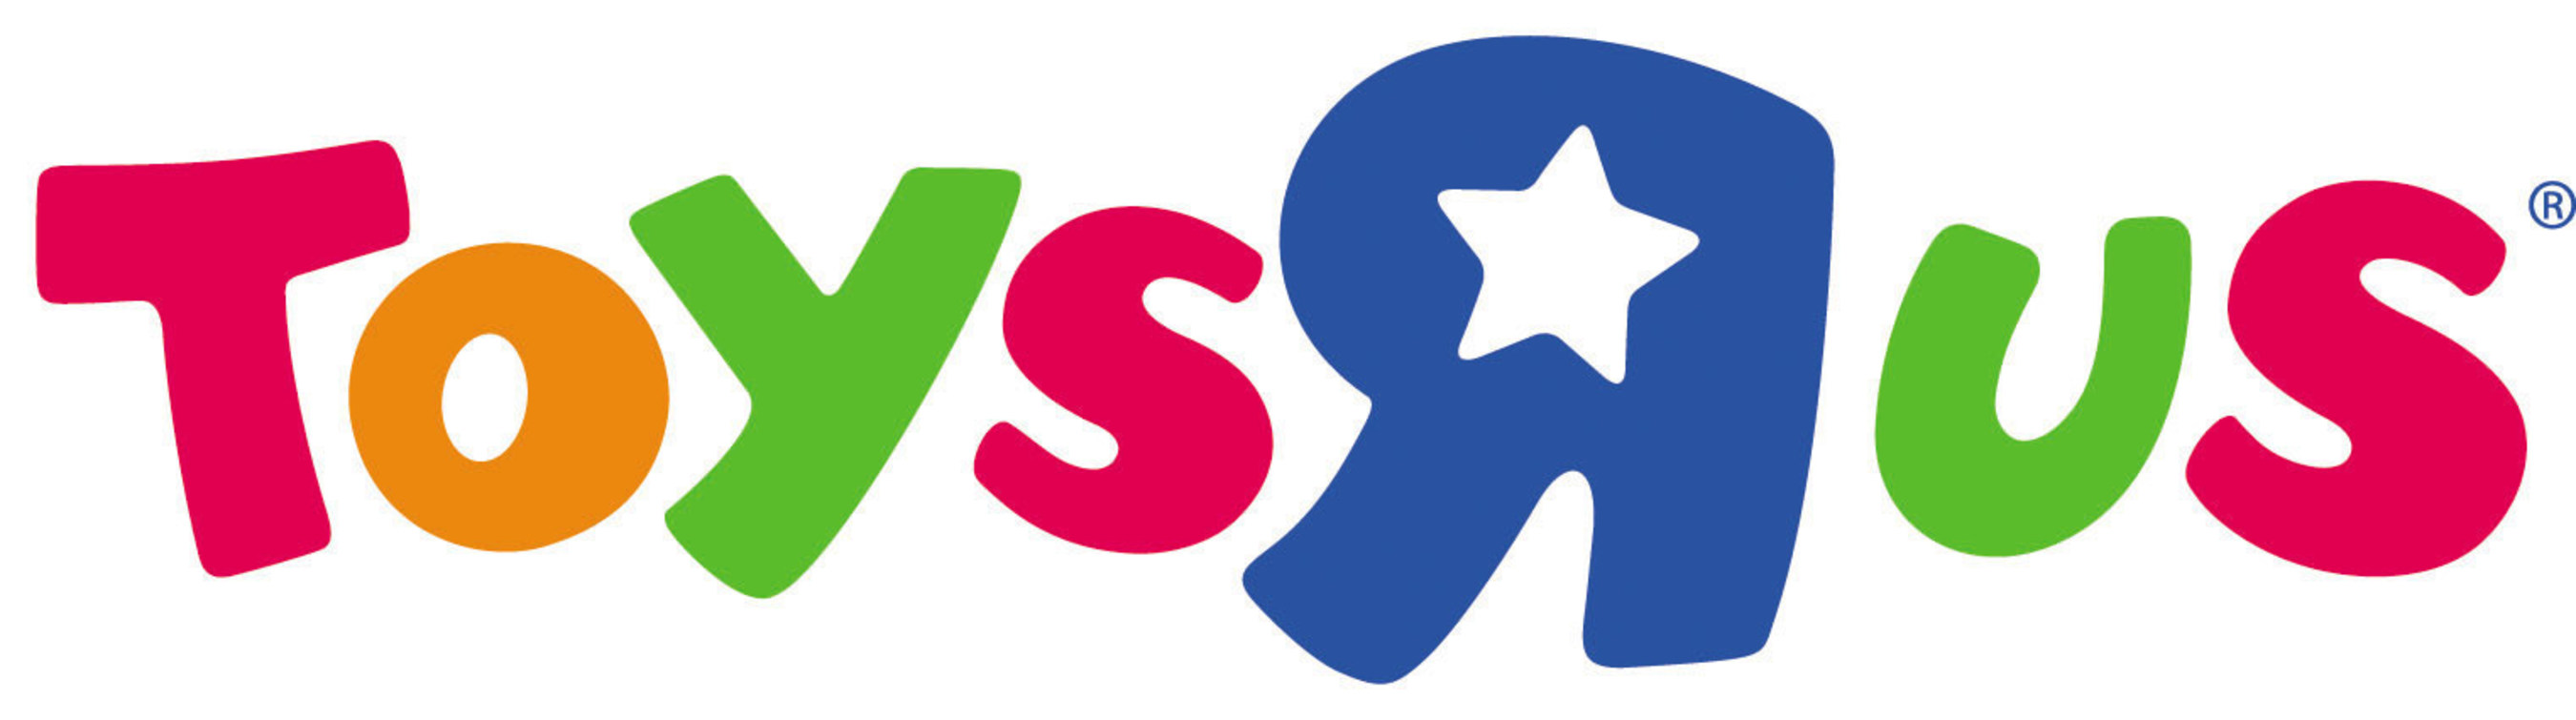 new name of toys r us